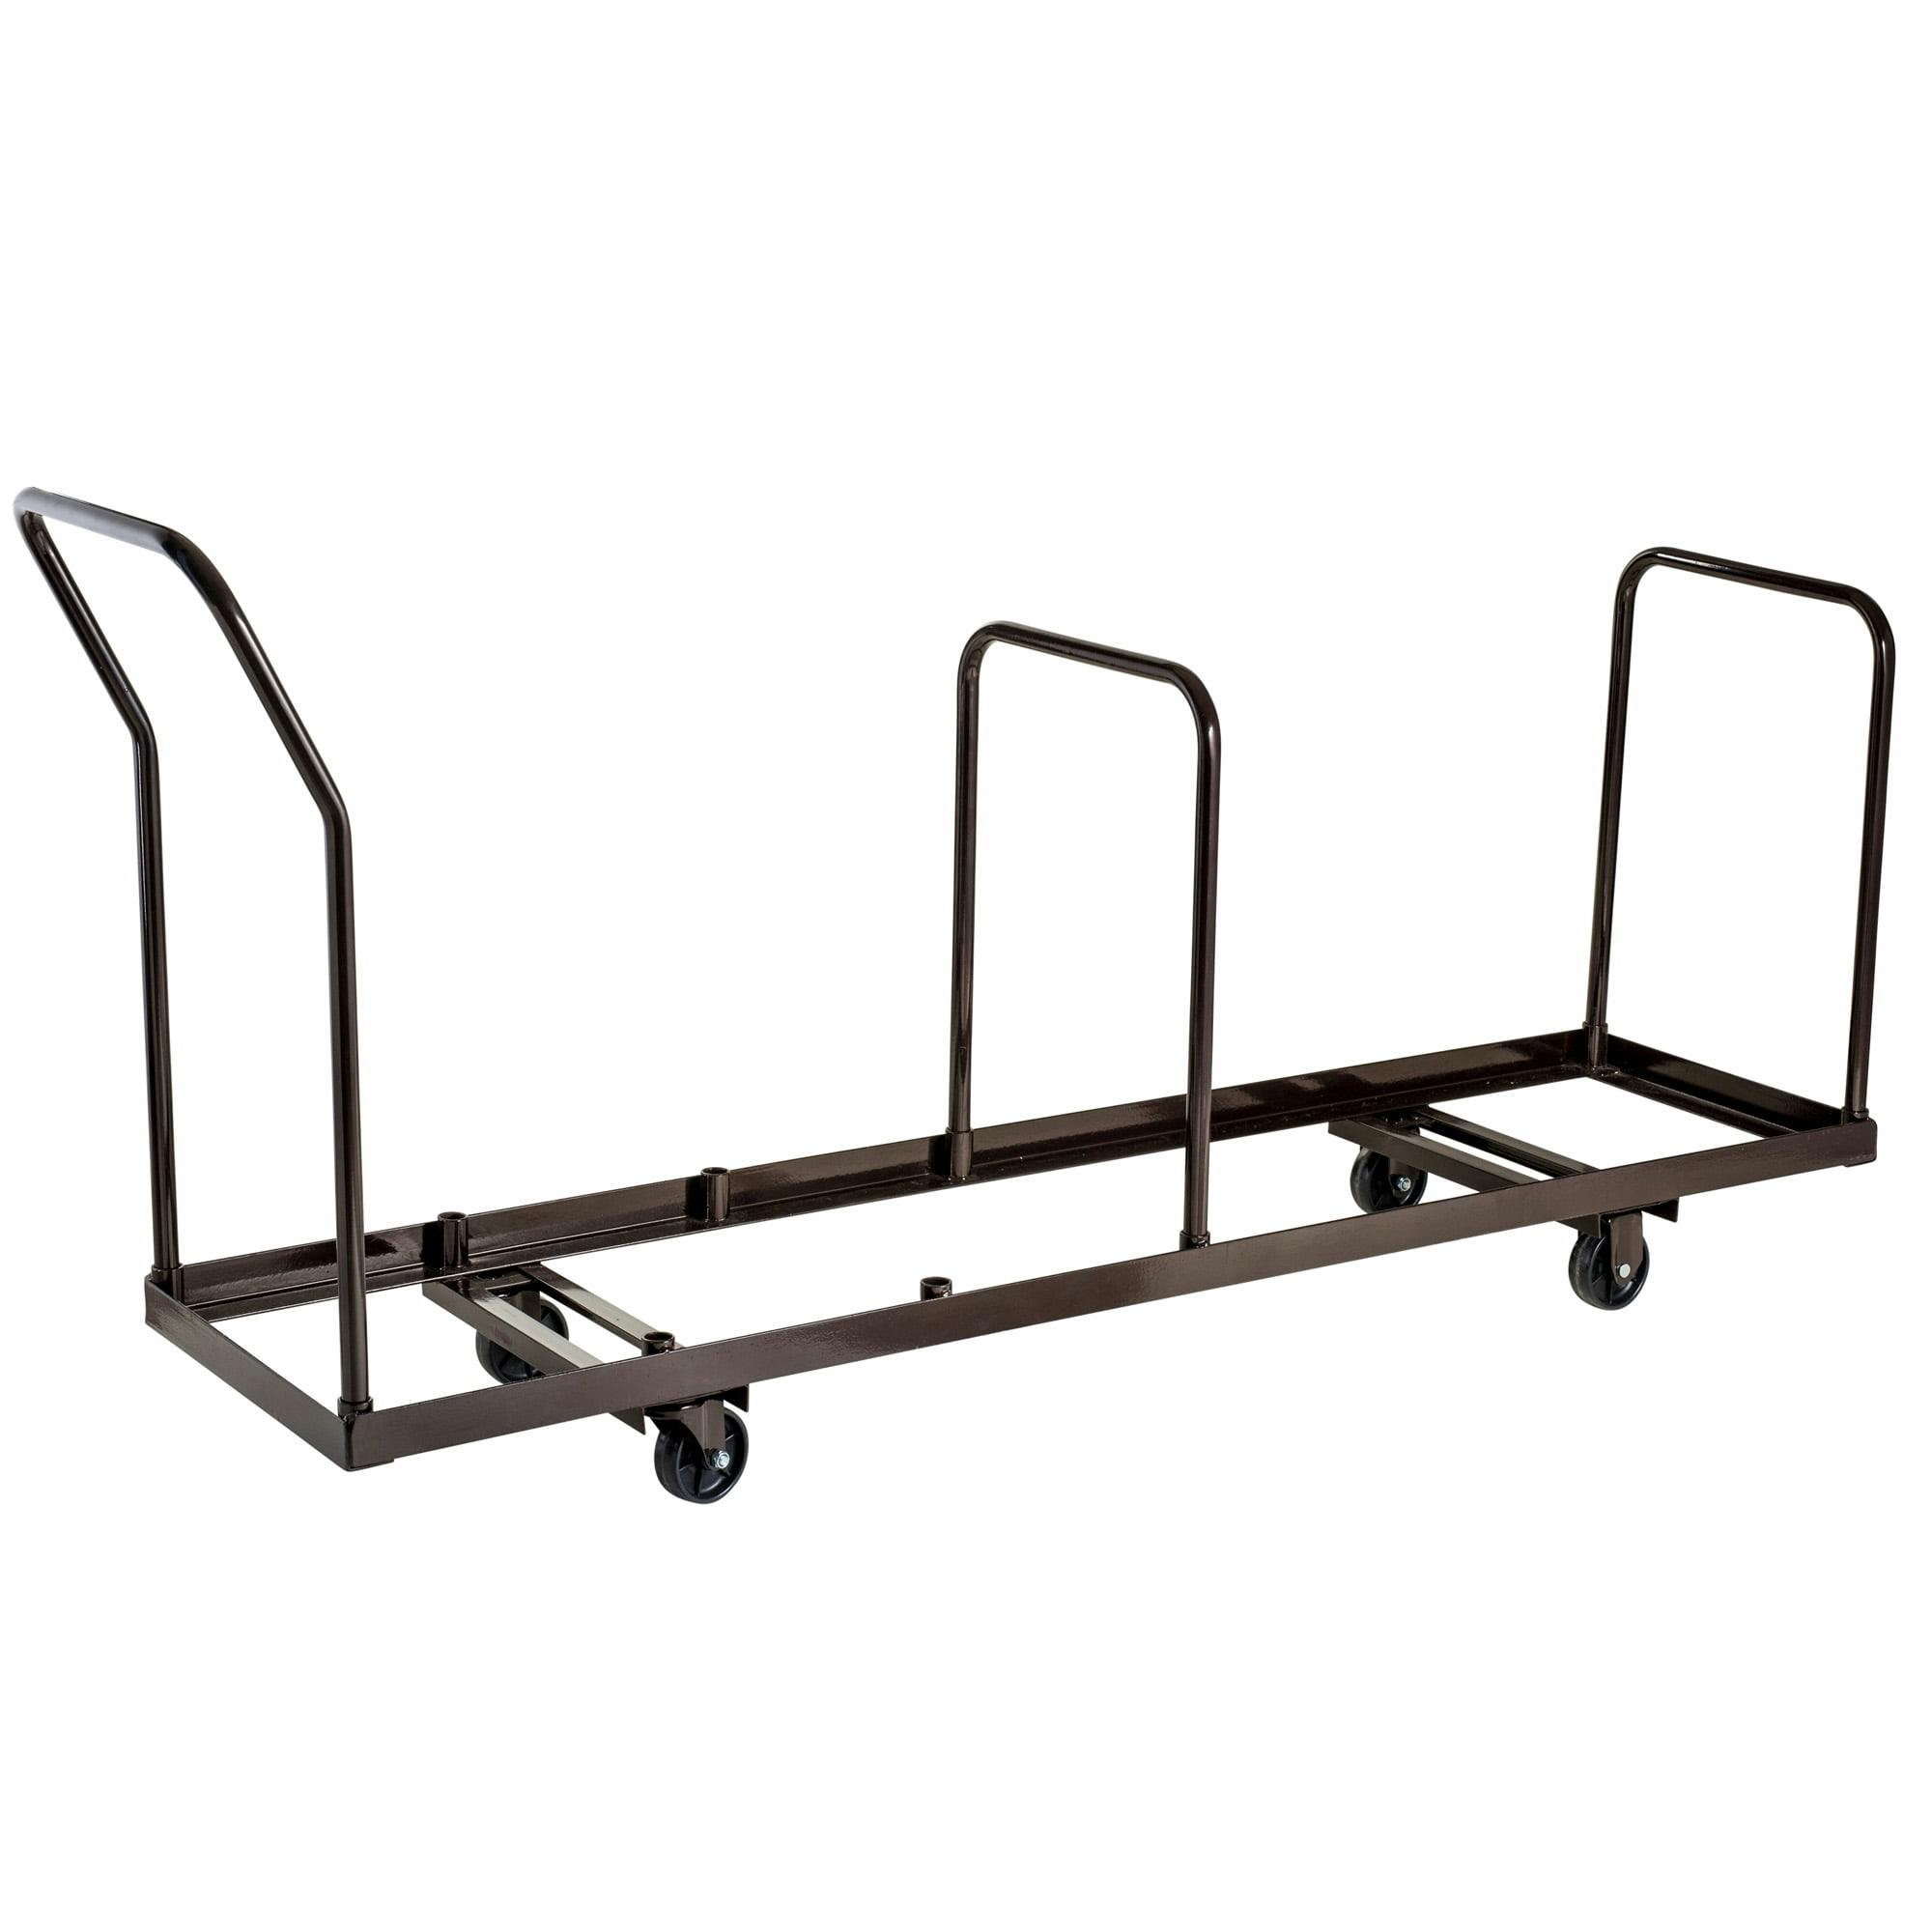 Solid Steel Vertical Folding Chair Storage Dolly, 35 Capacity